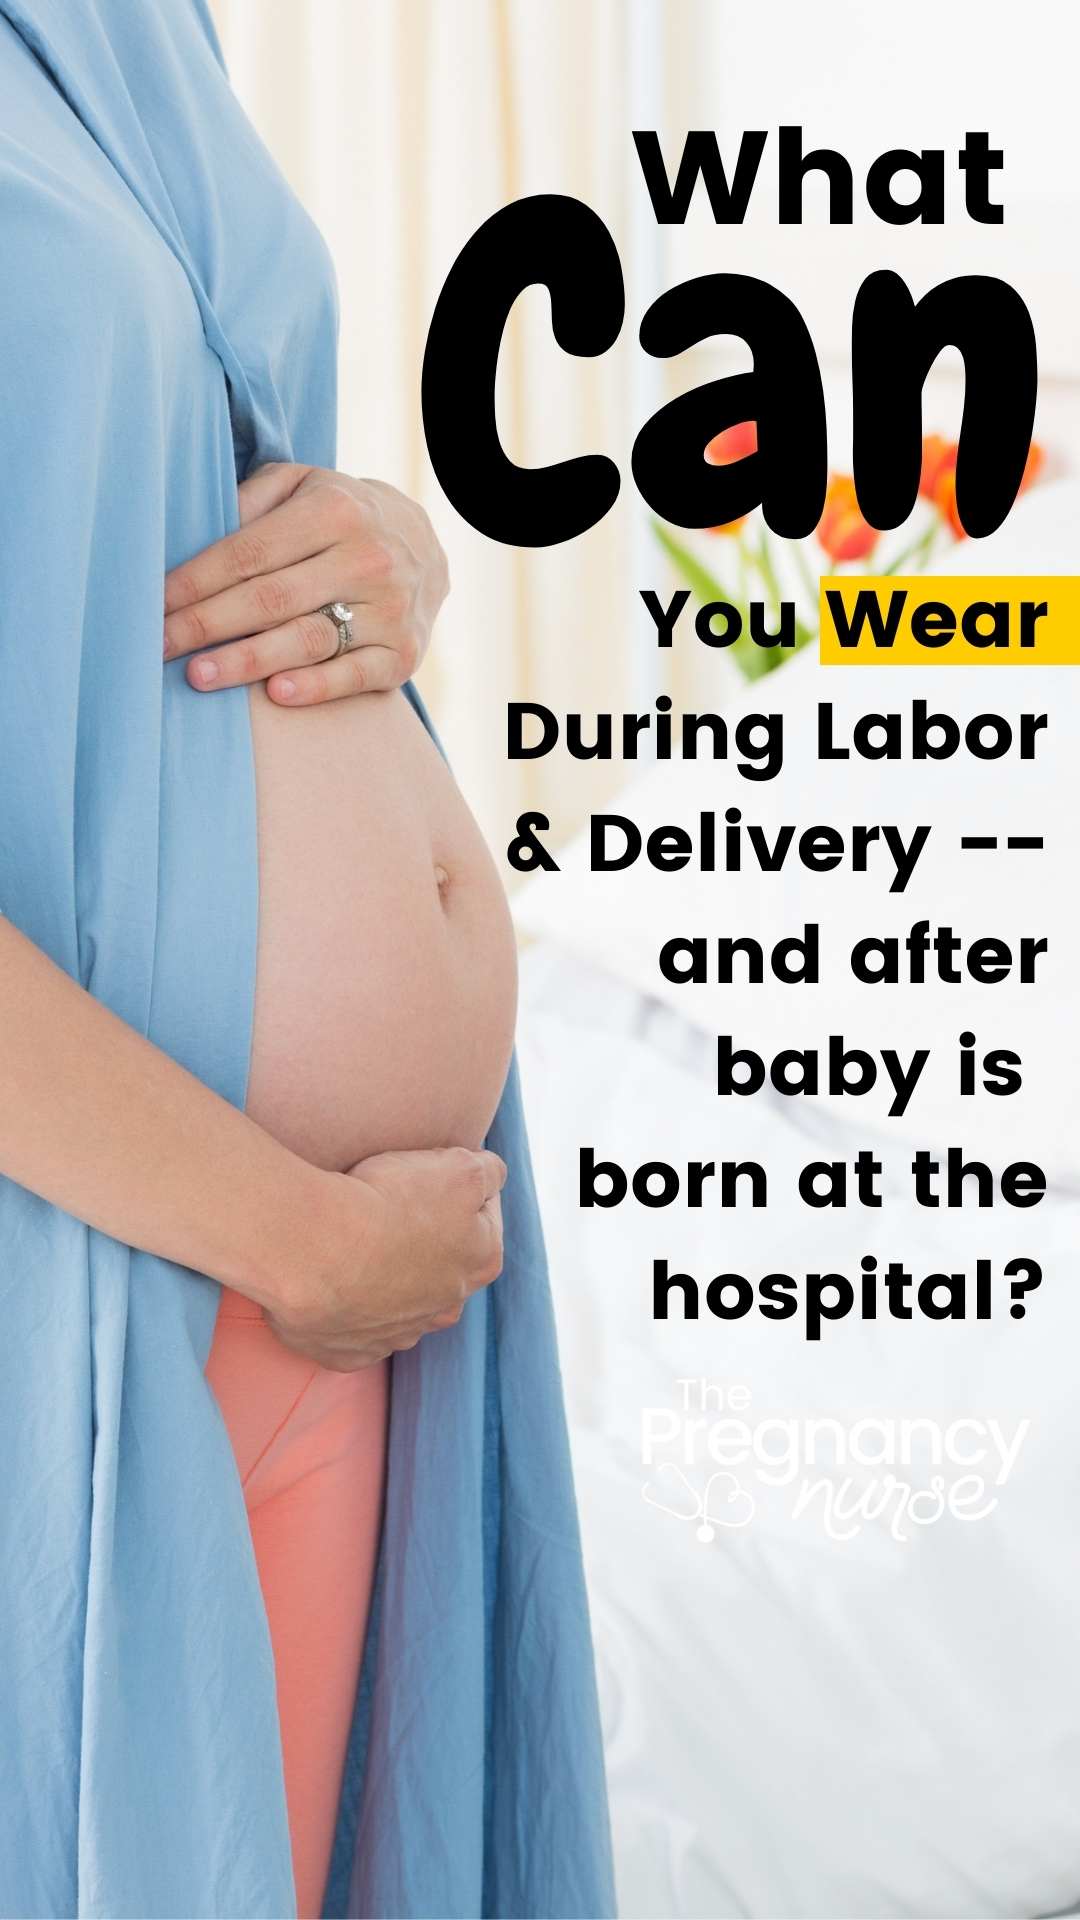 Making the right choice on what to wear during labor and delivery can be confusing. Do you wear the hospital gown or bring your own to give birth in?